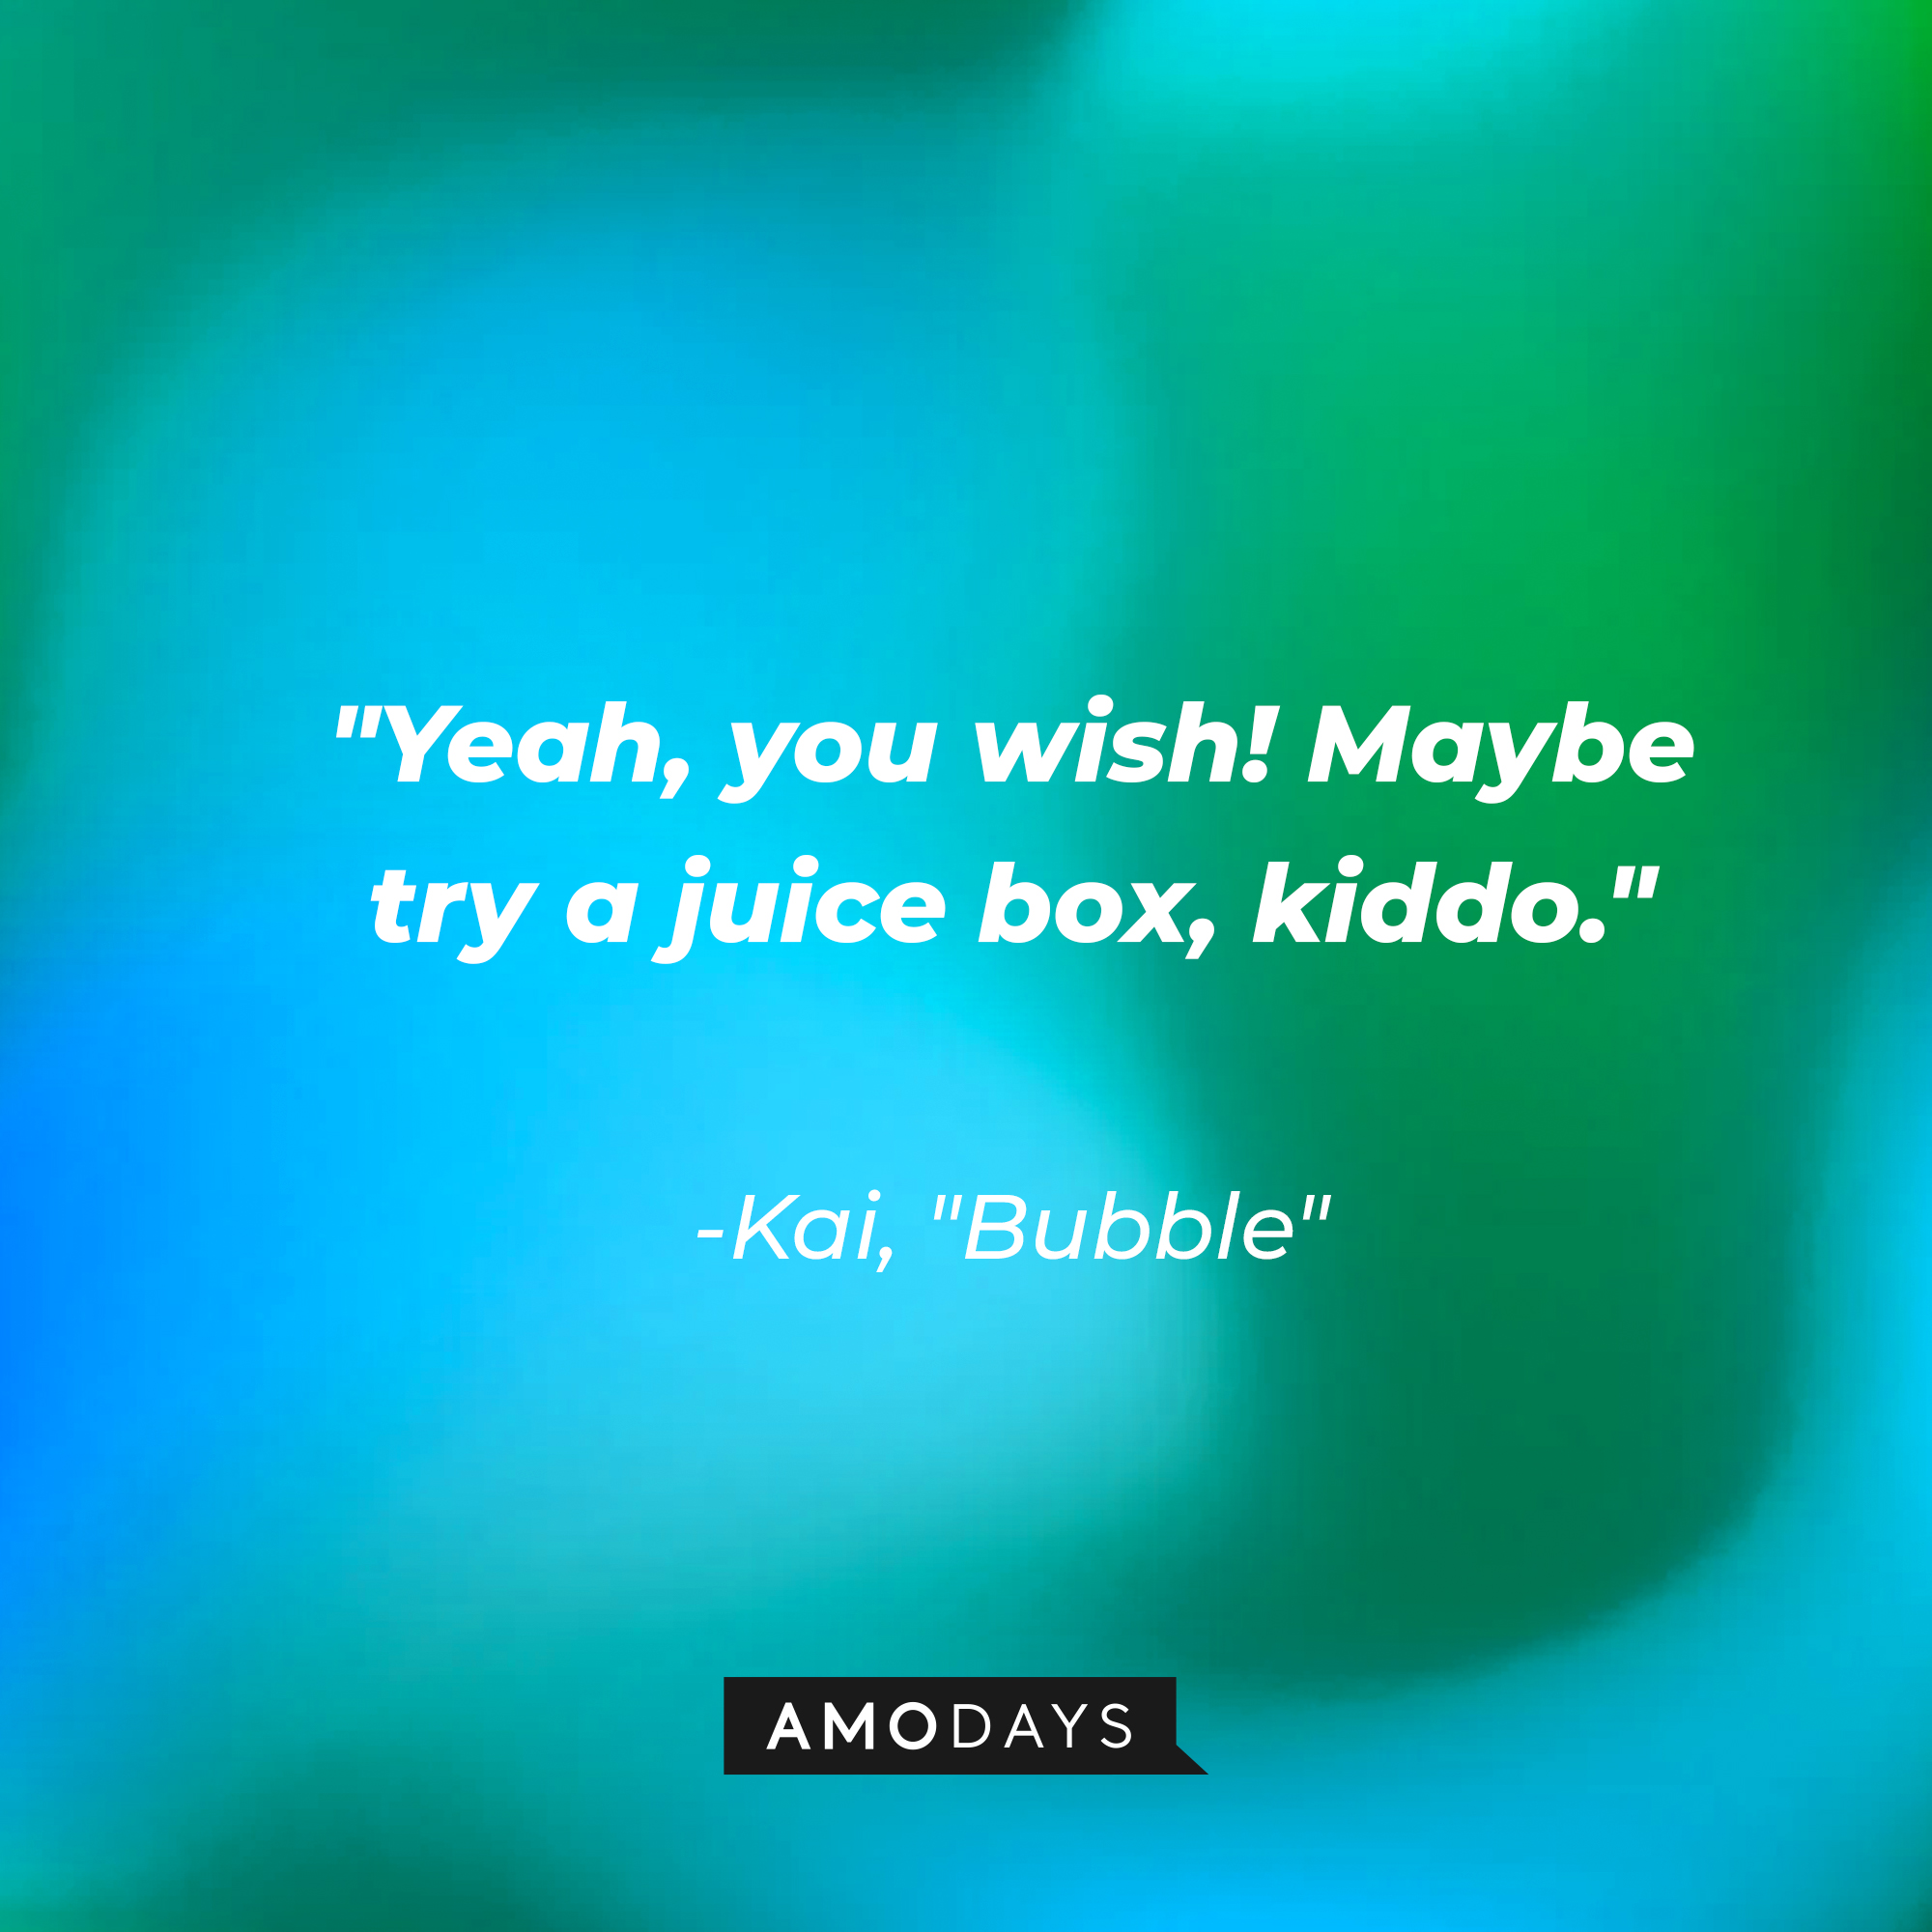 Kai's quote on "Bubble:" "Yeah, you wish! Maybe try a juice box, kiddo." | Source: AmoDays